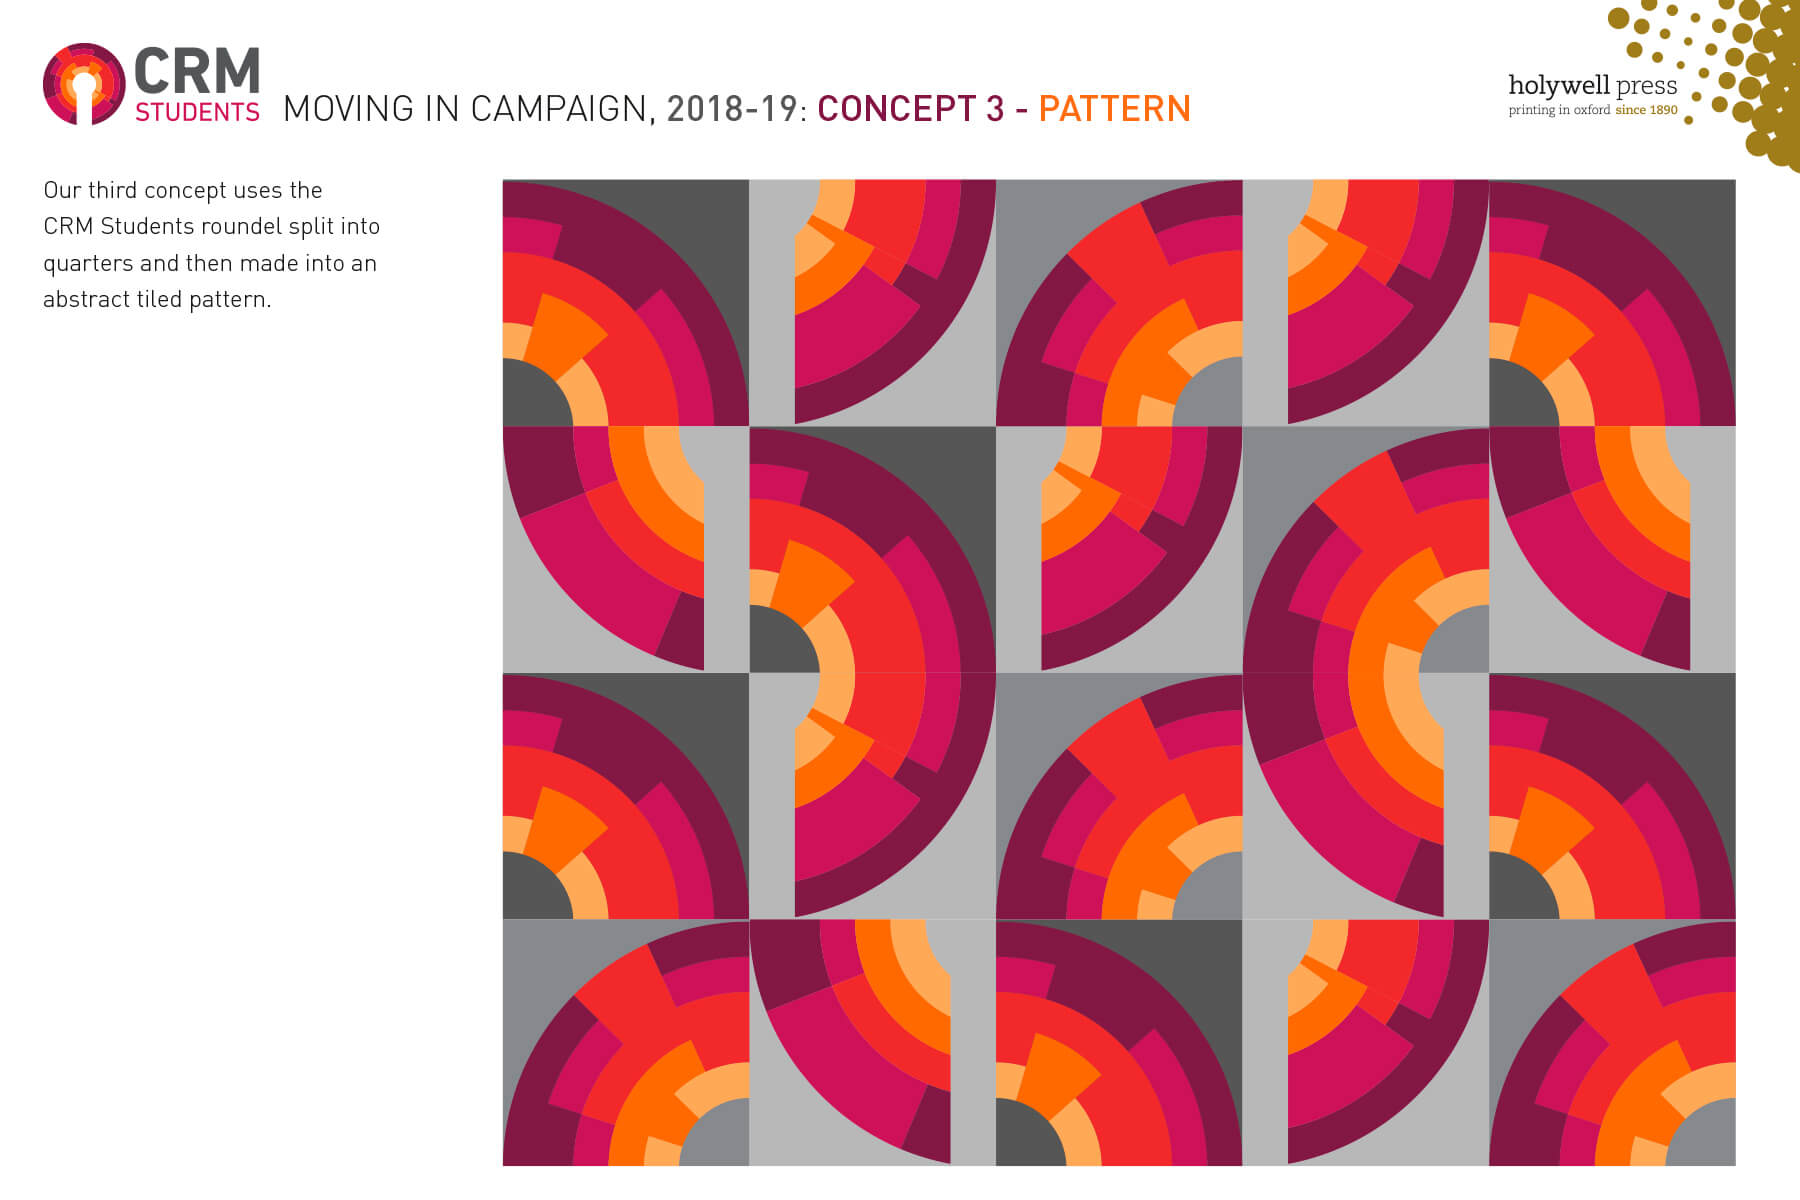 CRM Students patterns concept pitch